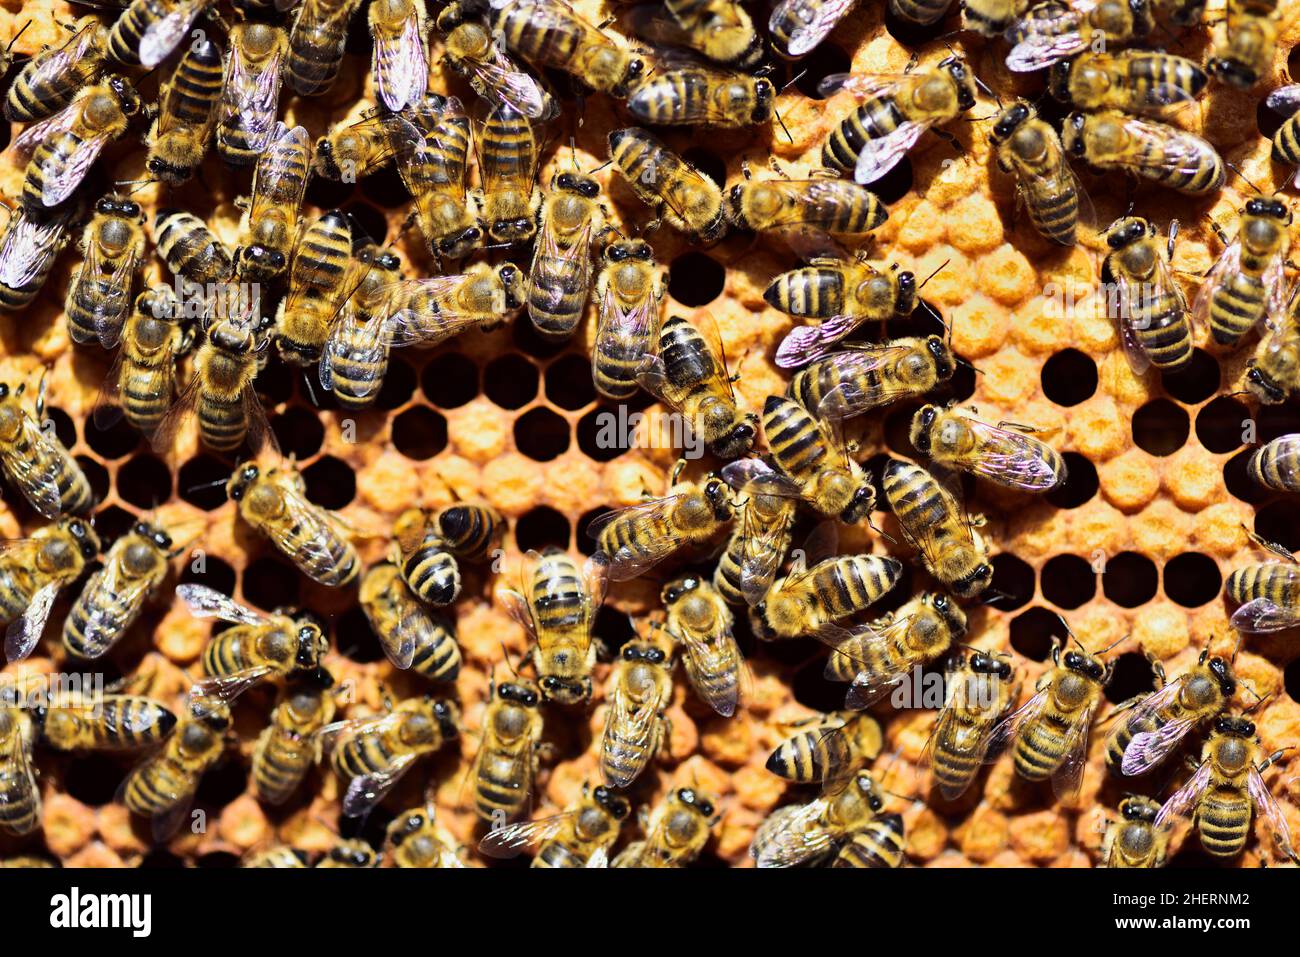 Workers of the honey bee (Apis mellifera var. carnica) on honeycomb with capped brood cells, Bavaria, Germany Stock Photo